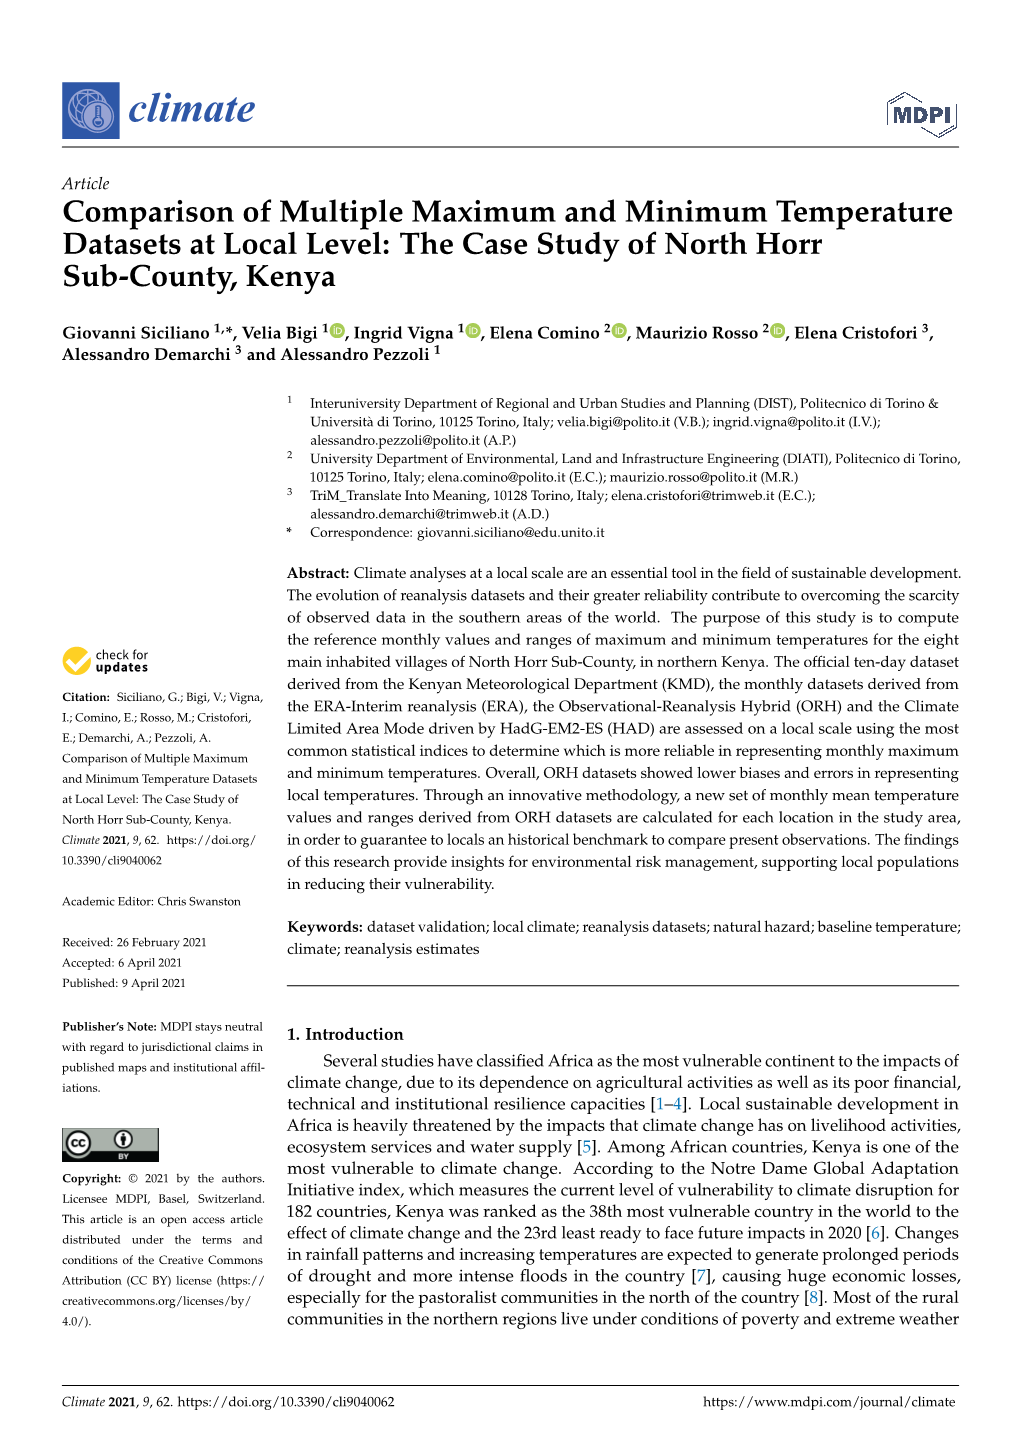 Comparison of Multiple Maximum and Minimum Temperature Datasets at Local Level: the Case Study of North Horr Sub-County, Kenya